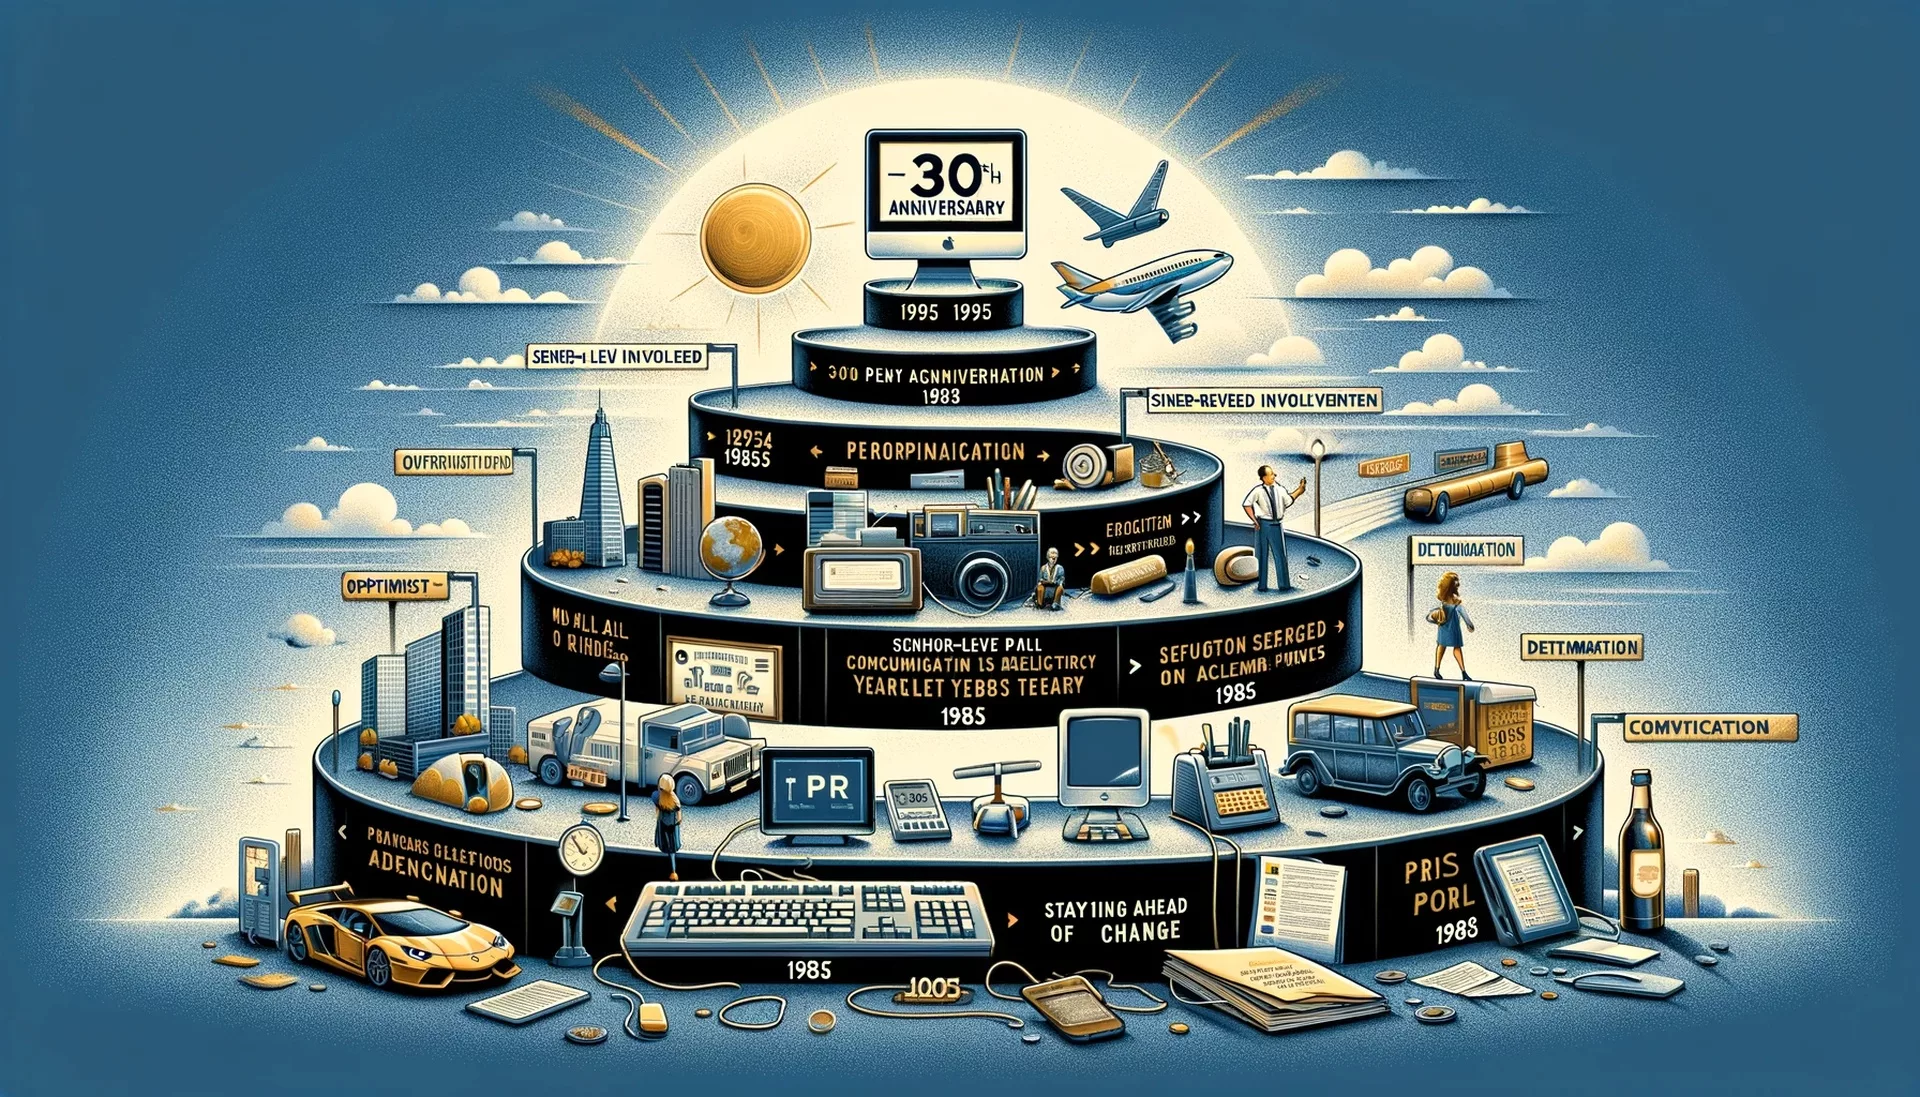 Retro style illustration celebrating a 30th anniversary with technological and corporate milestones.